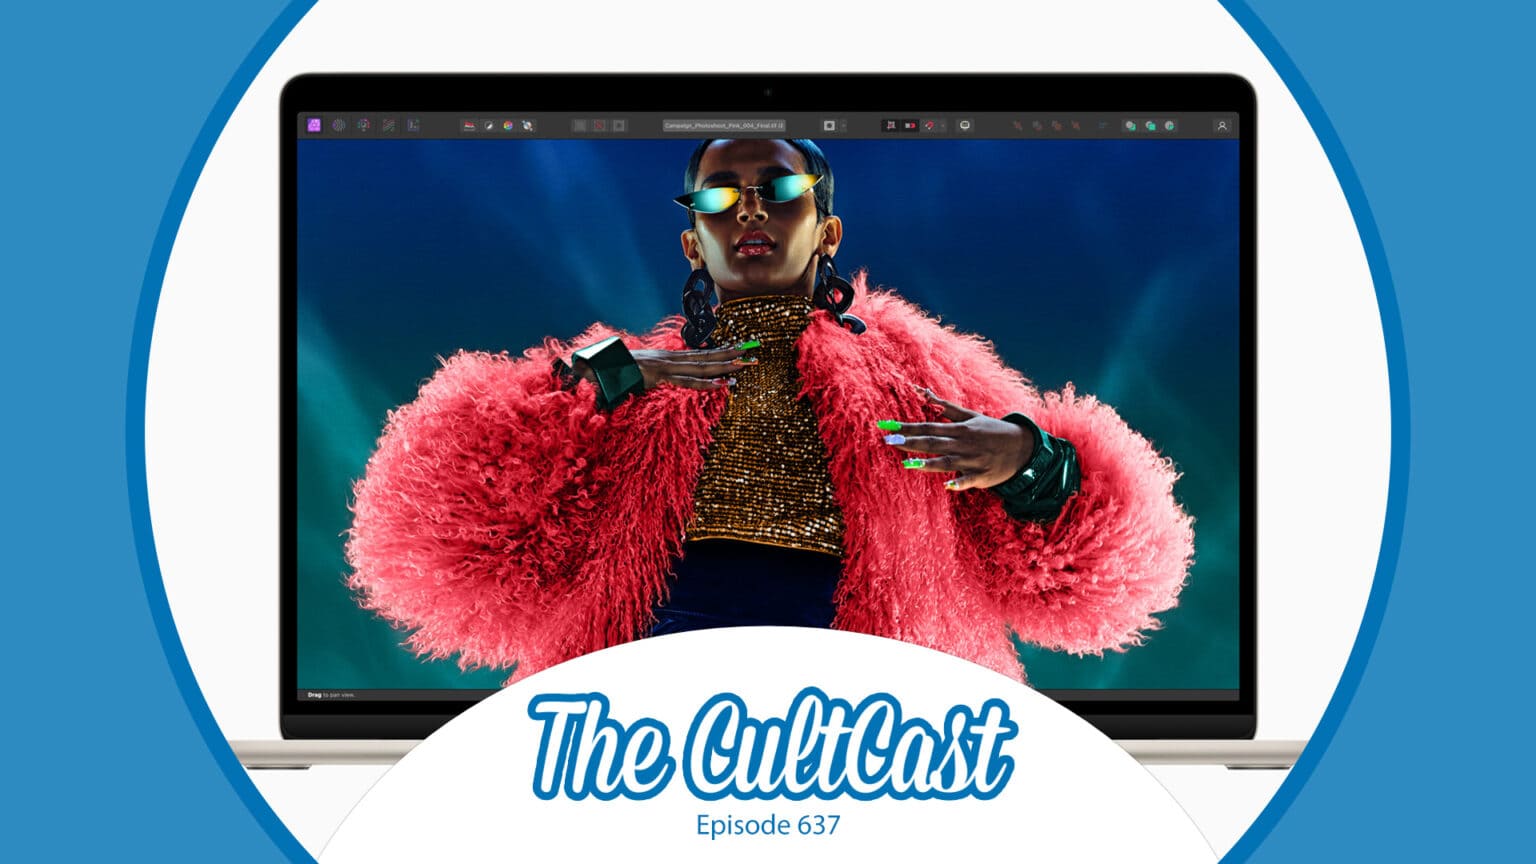 M3 MacBook Air promo image with The CultCast logo (episode 637).